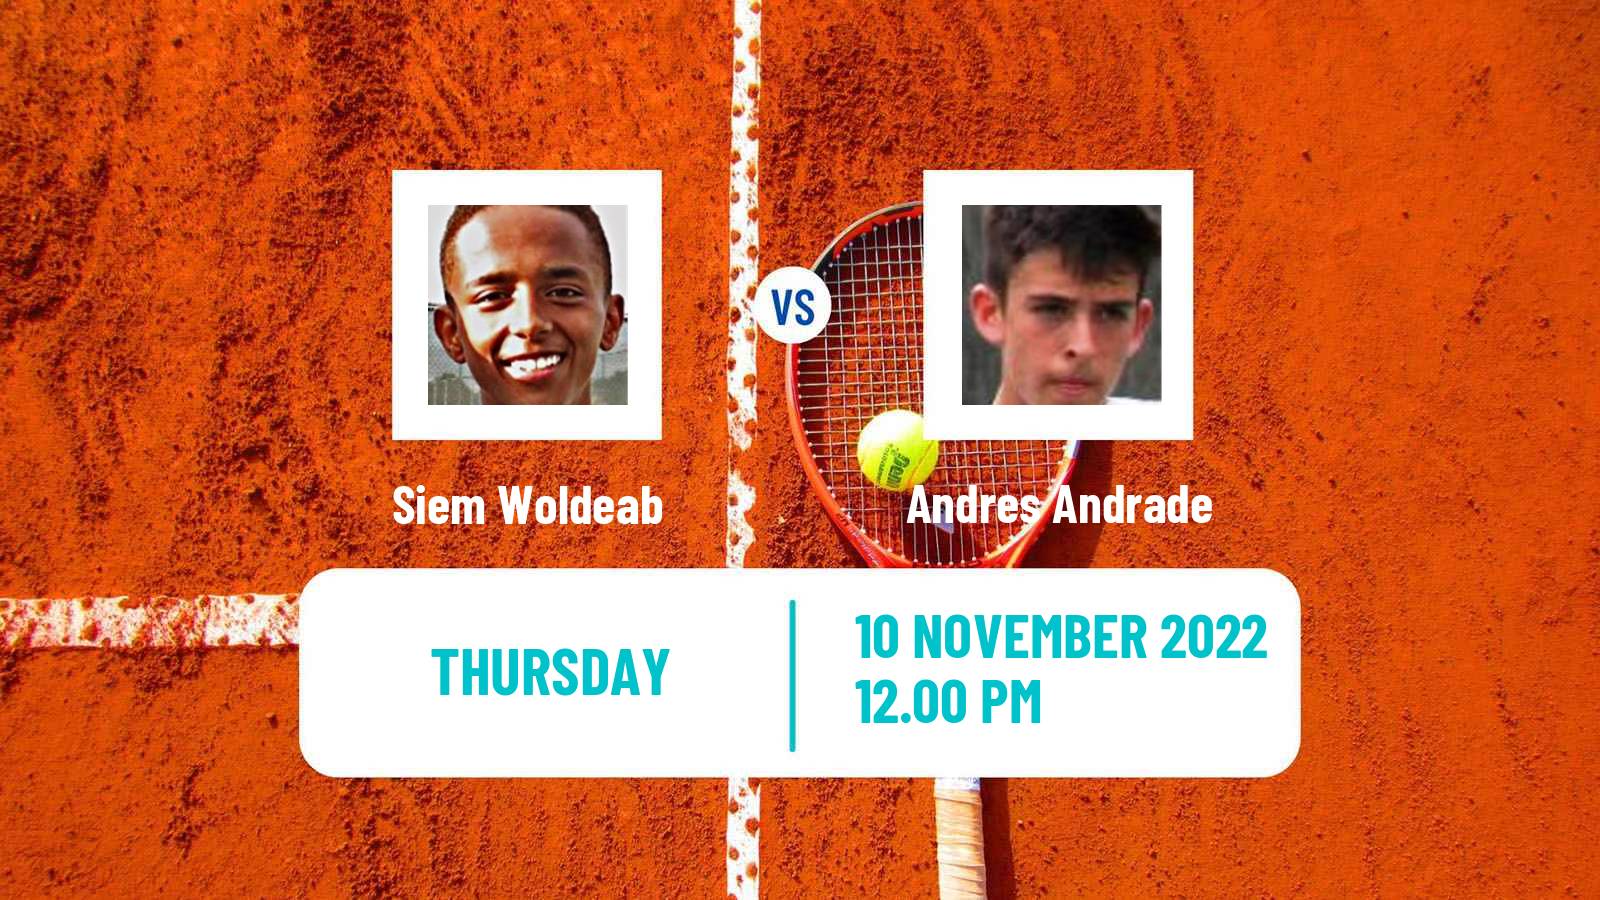 Tennis ITF Tournaments Siem Woldeab - Andres Andrade